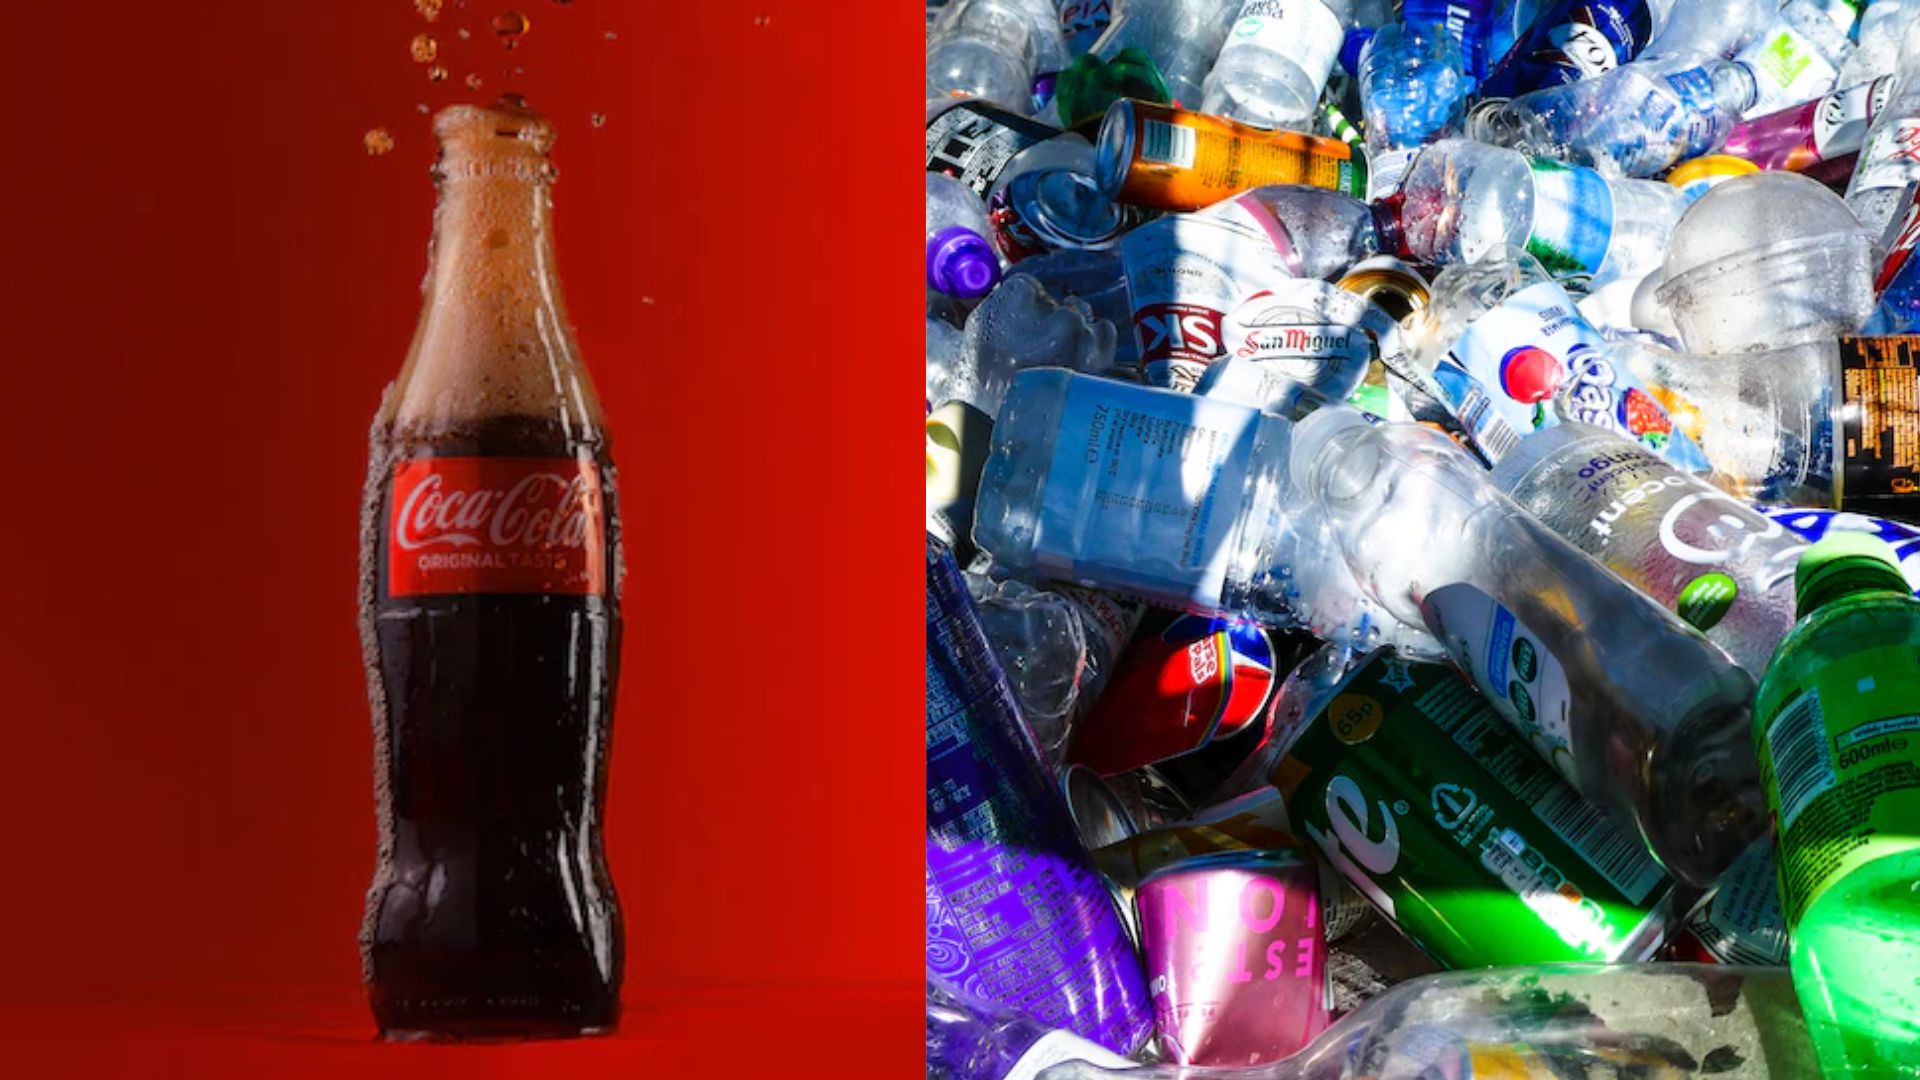 Coca-cola’s sponsorship of UN climate talks in Egypt has received backlash, especially from climate change campaigners.